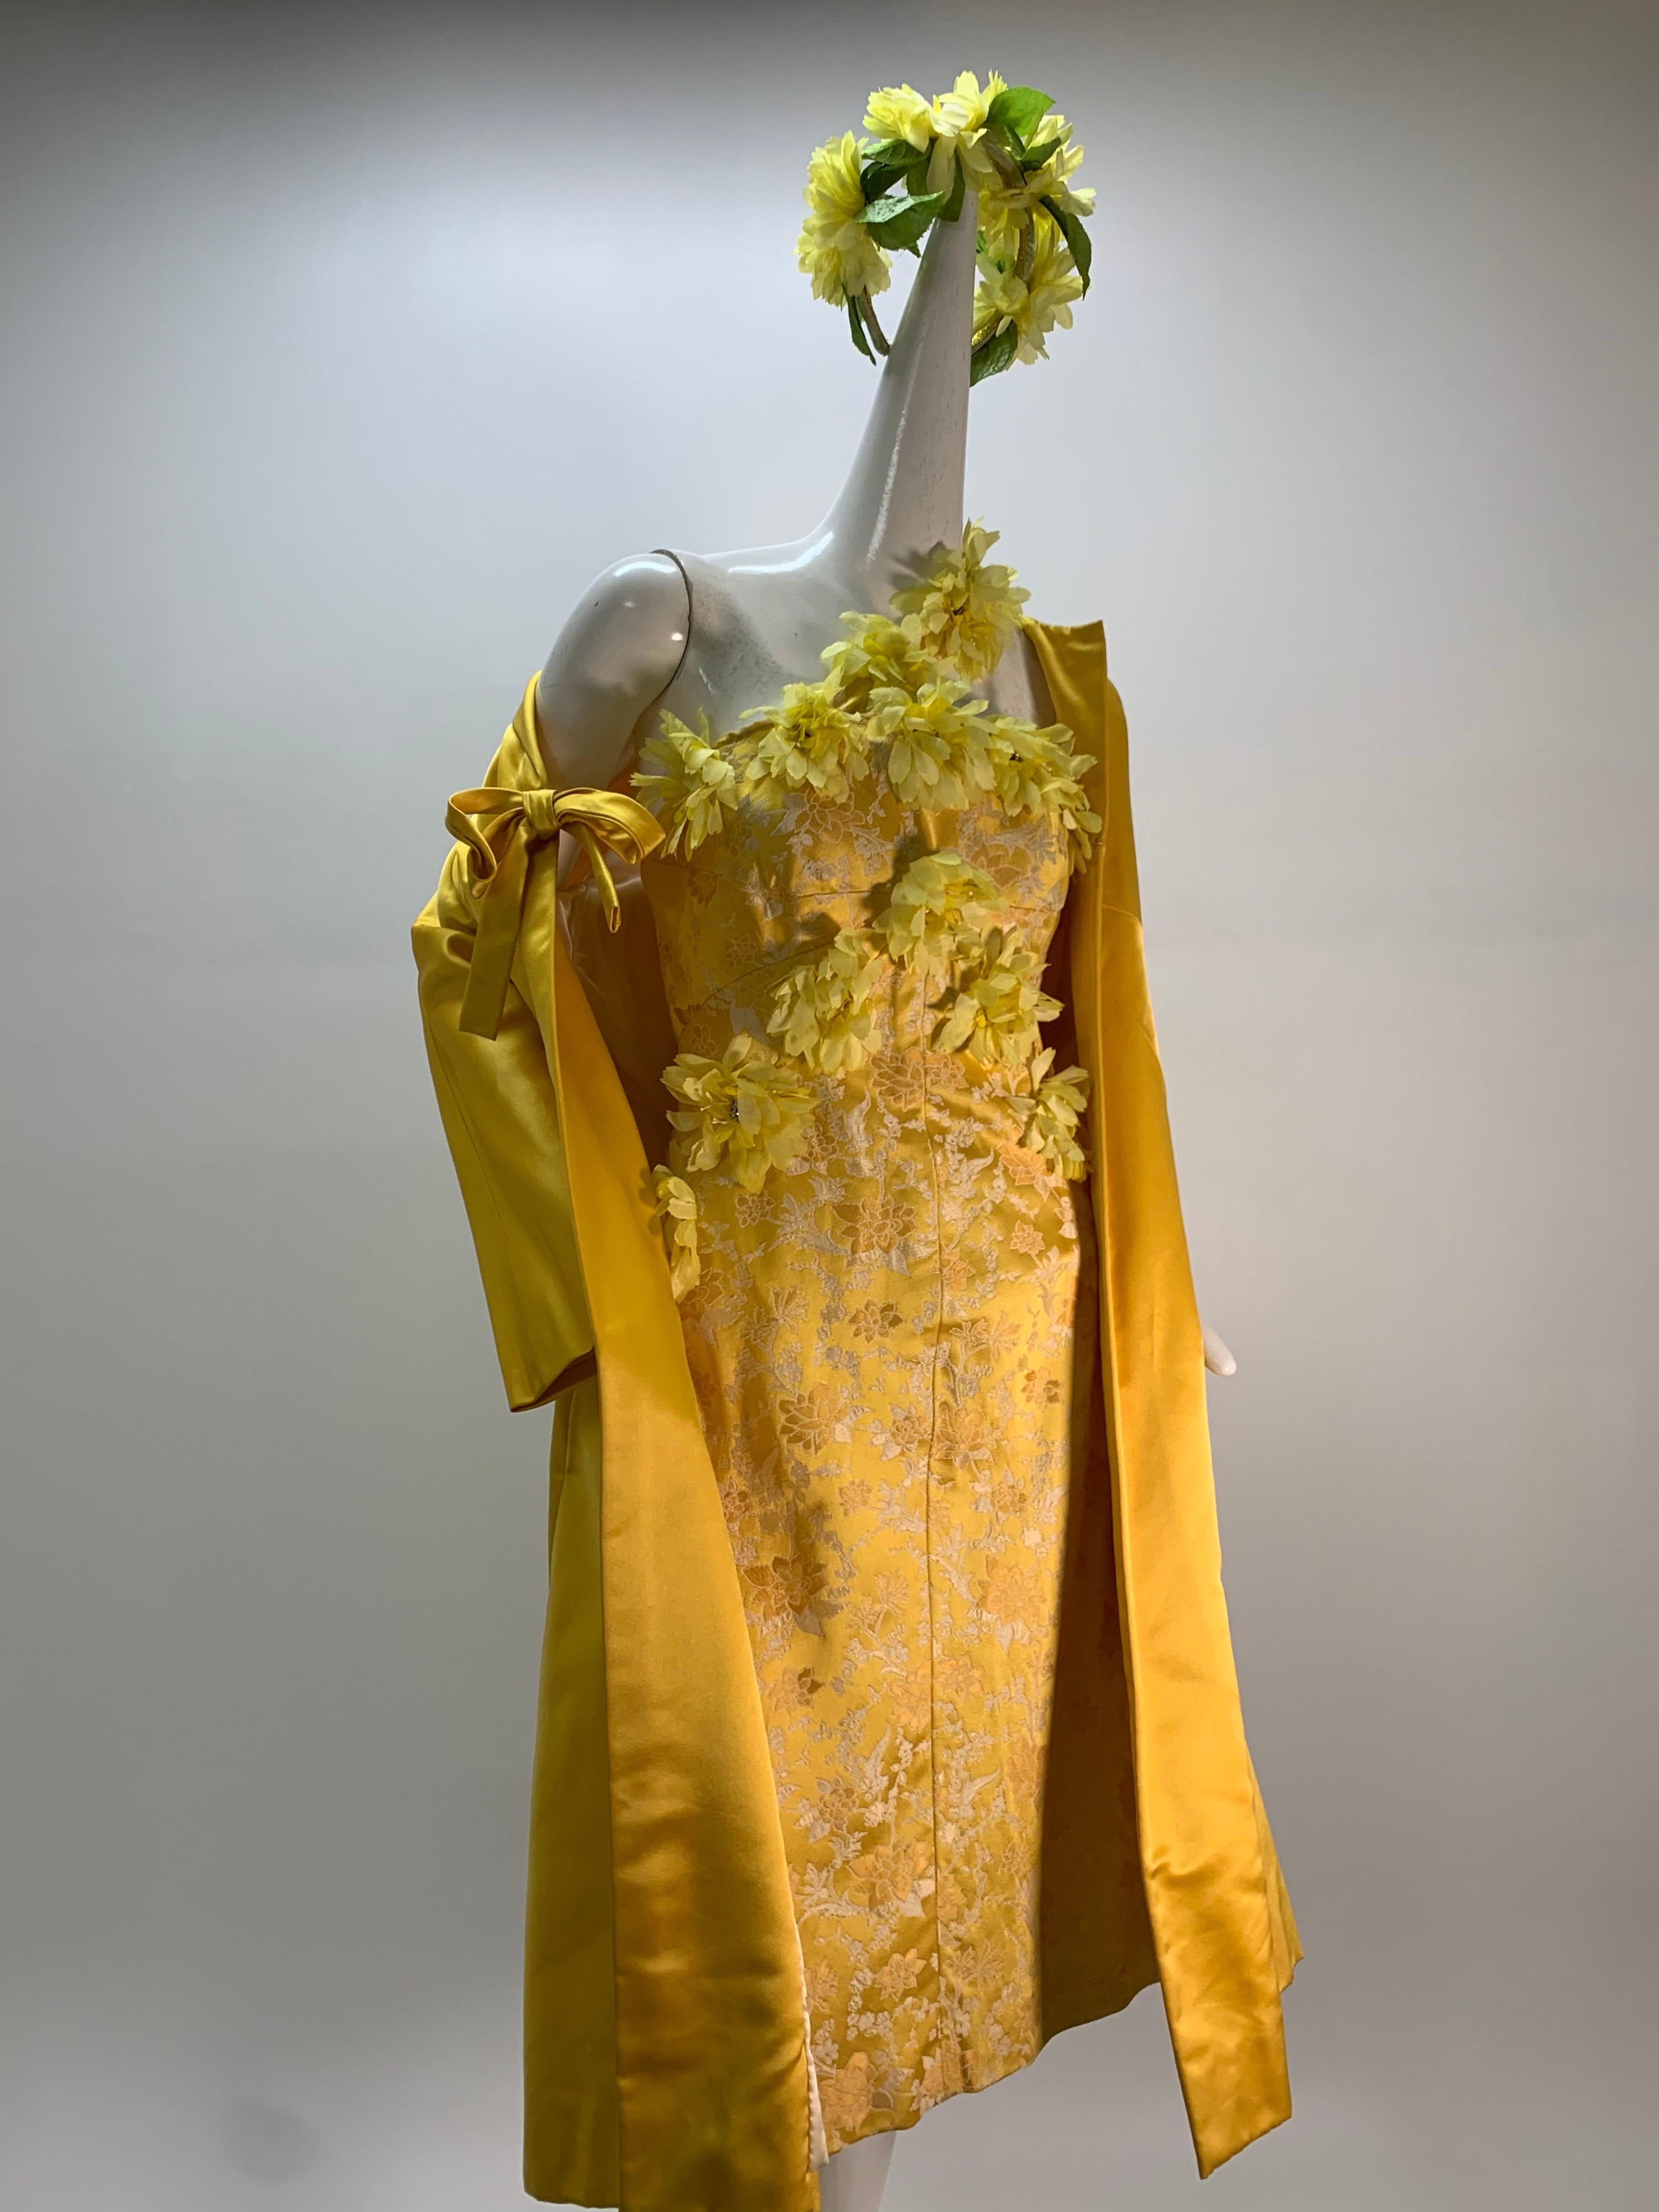 1960s Canary yellow silk brocade cocktail dress and opera coat ensemble: Floral brocade dress features applied silk flowers at bodice and neckline. Jacket is beautifully tailored and seamed with a bow at front closure. Fully lined, with back zip